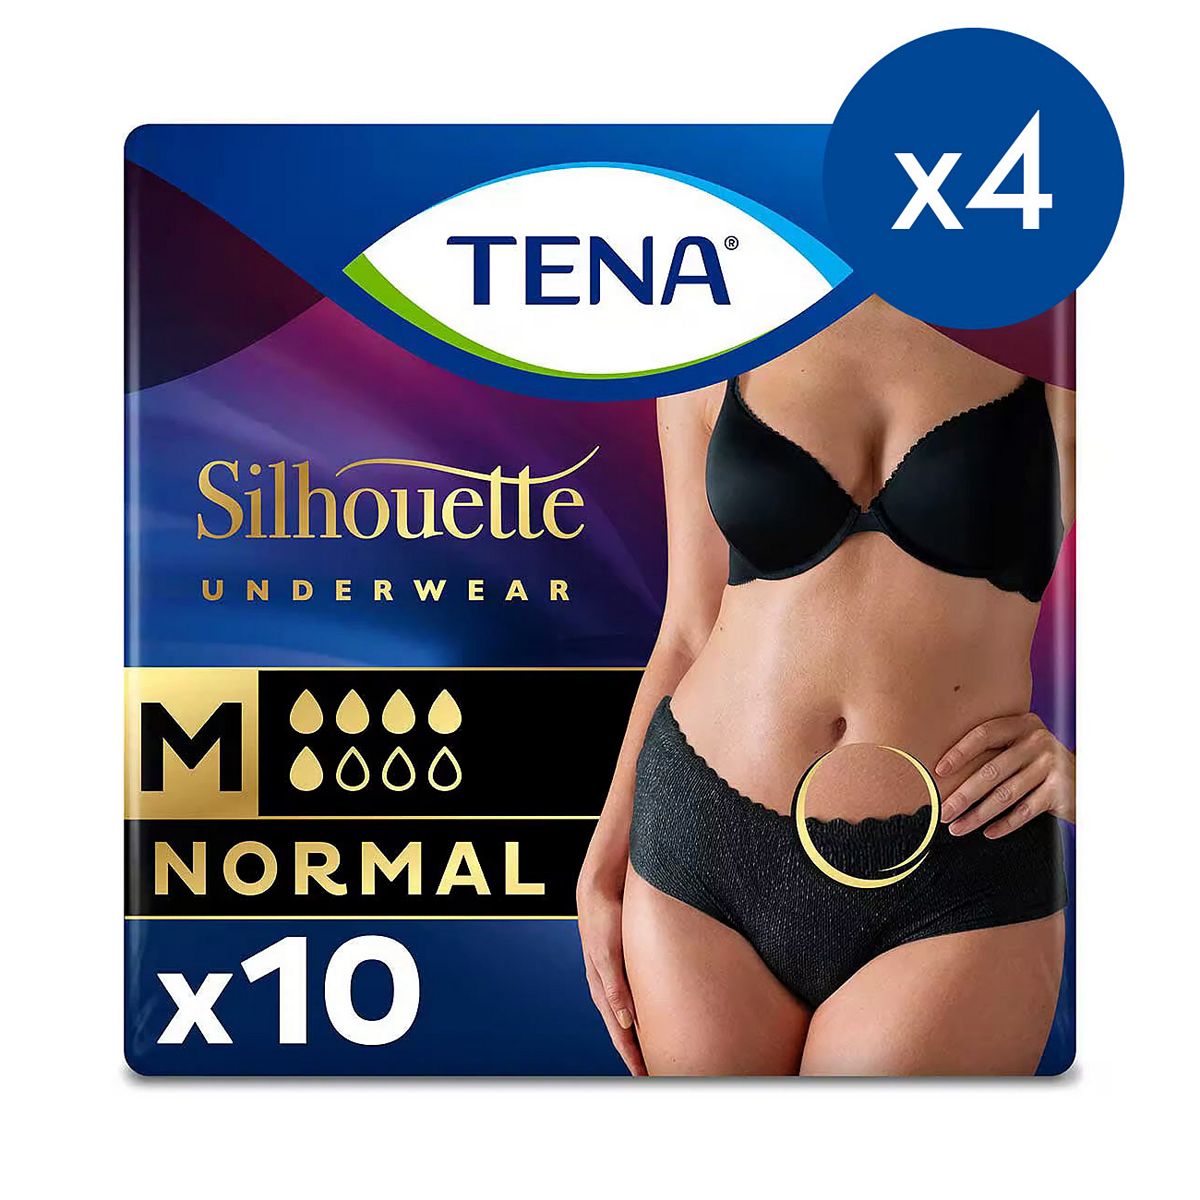 TENA Silhouette Normal Black Lady incontinence Low Waist Pants - Medium - 4 packs of 10 bundle GOODS Boots   